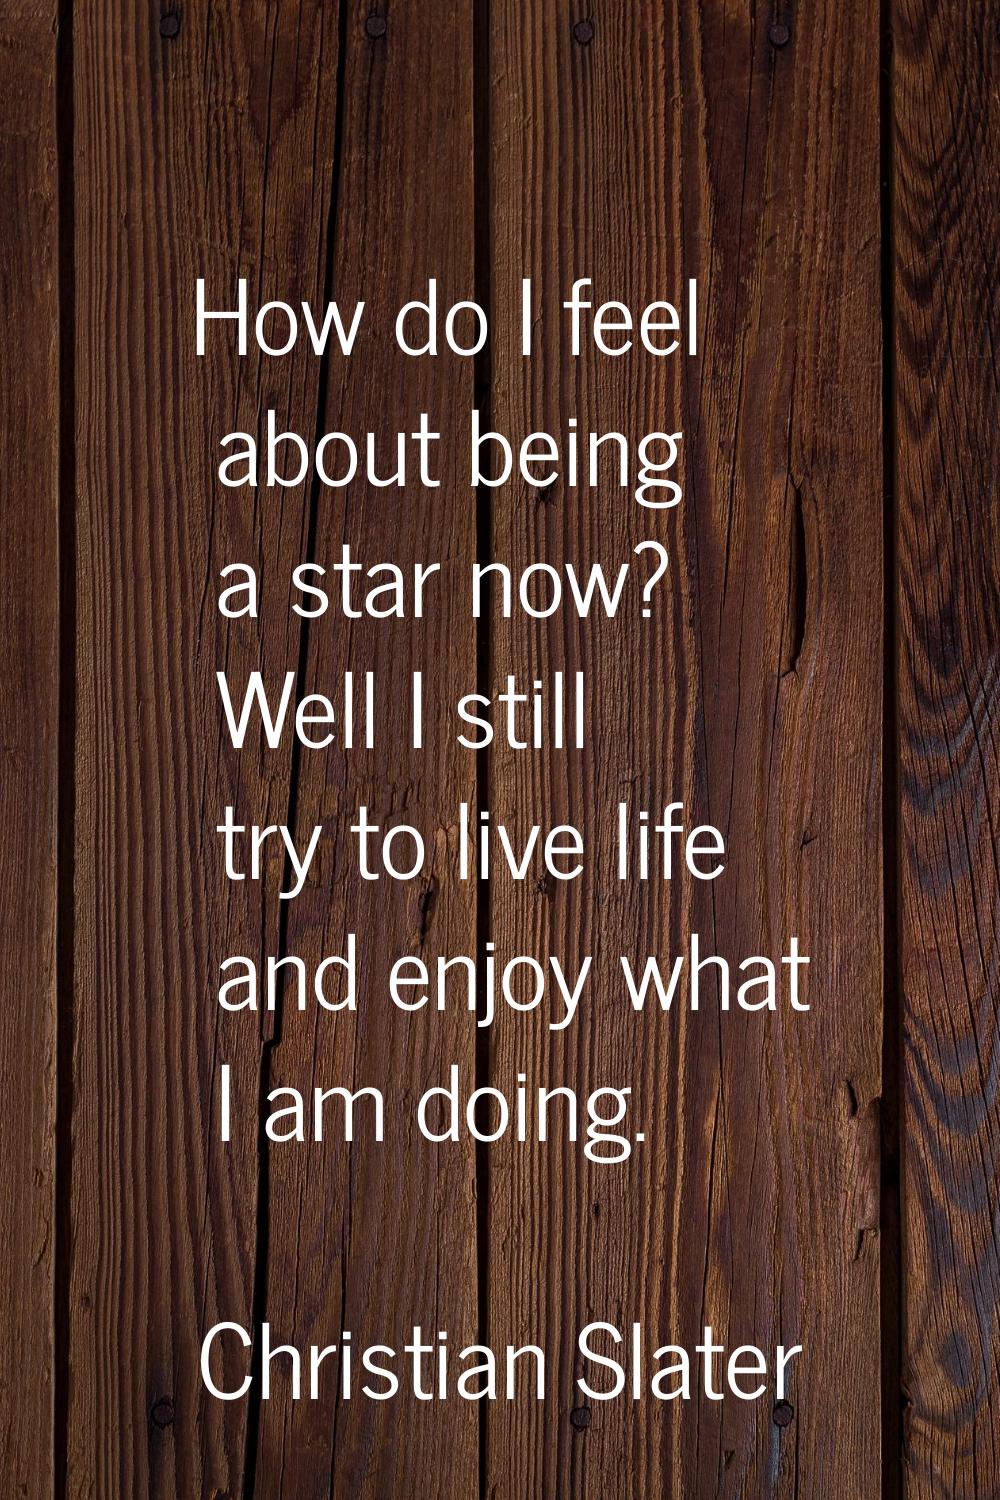 How do I feel about being a star now? Well I still try to live life and enjoy what I am doing.